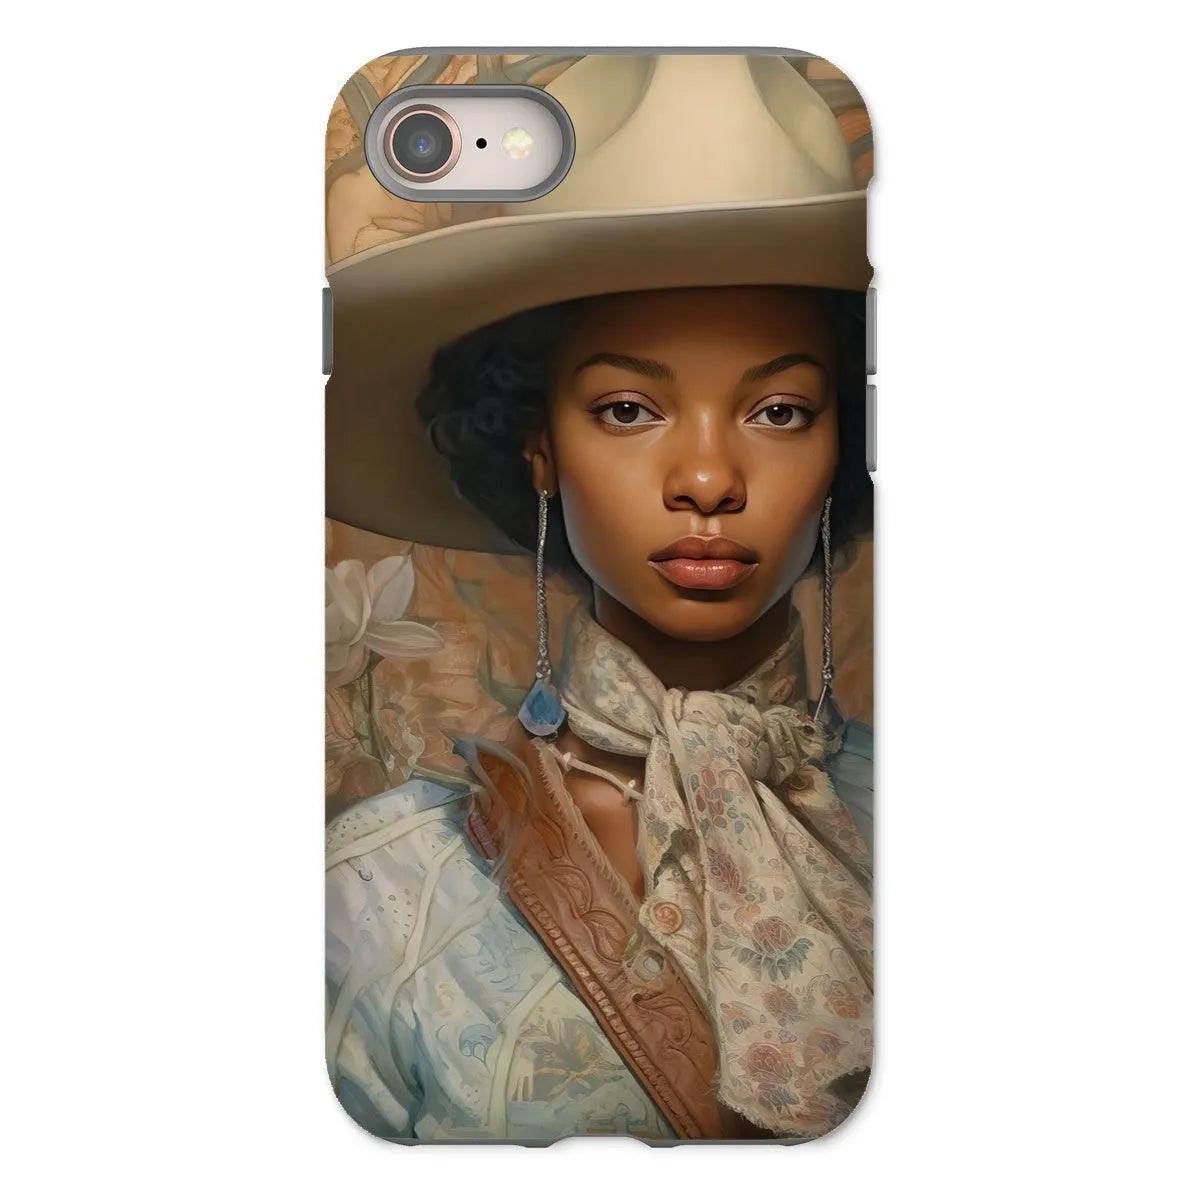 Imani The Lesbian Cowgirl - Sapphic Art Phone Case - Iphone 8 / Matte - Mobile Phone Cases - Aesthetic Art